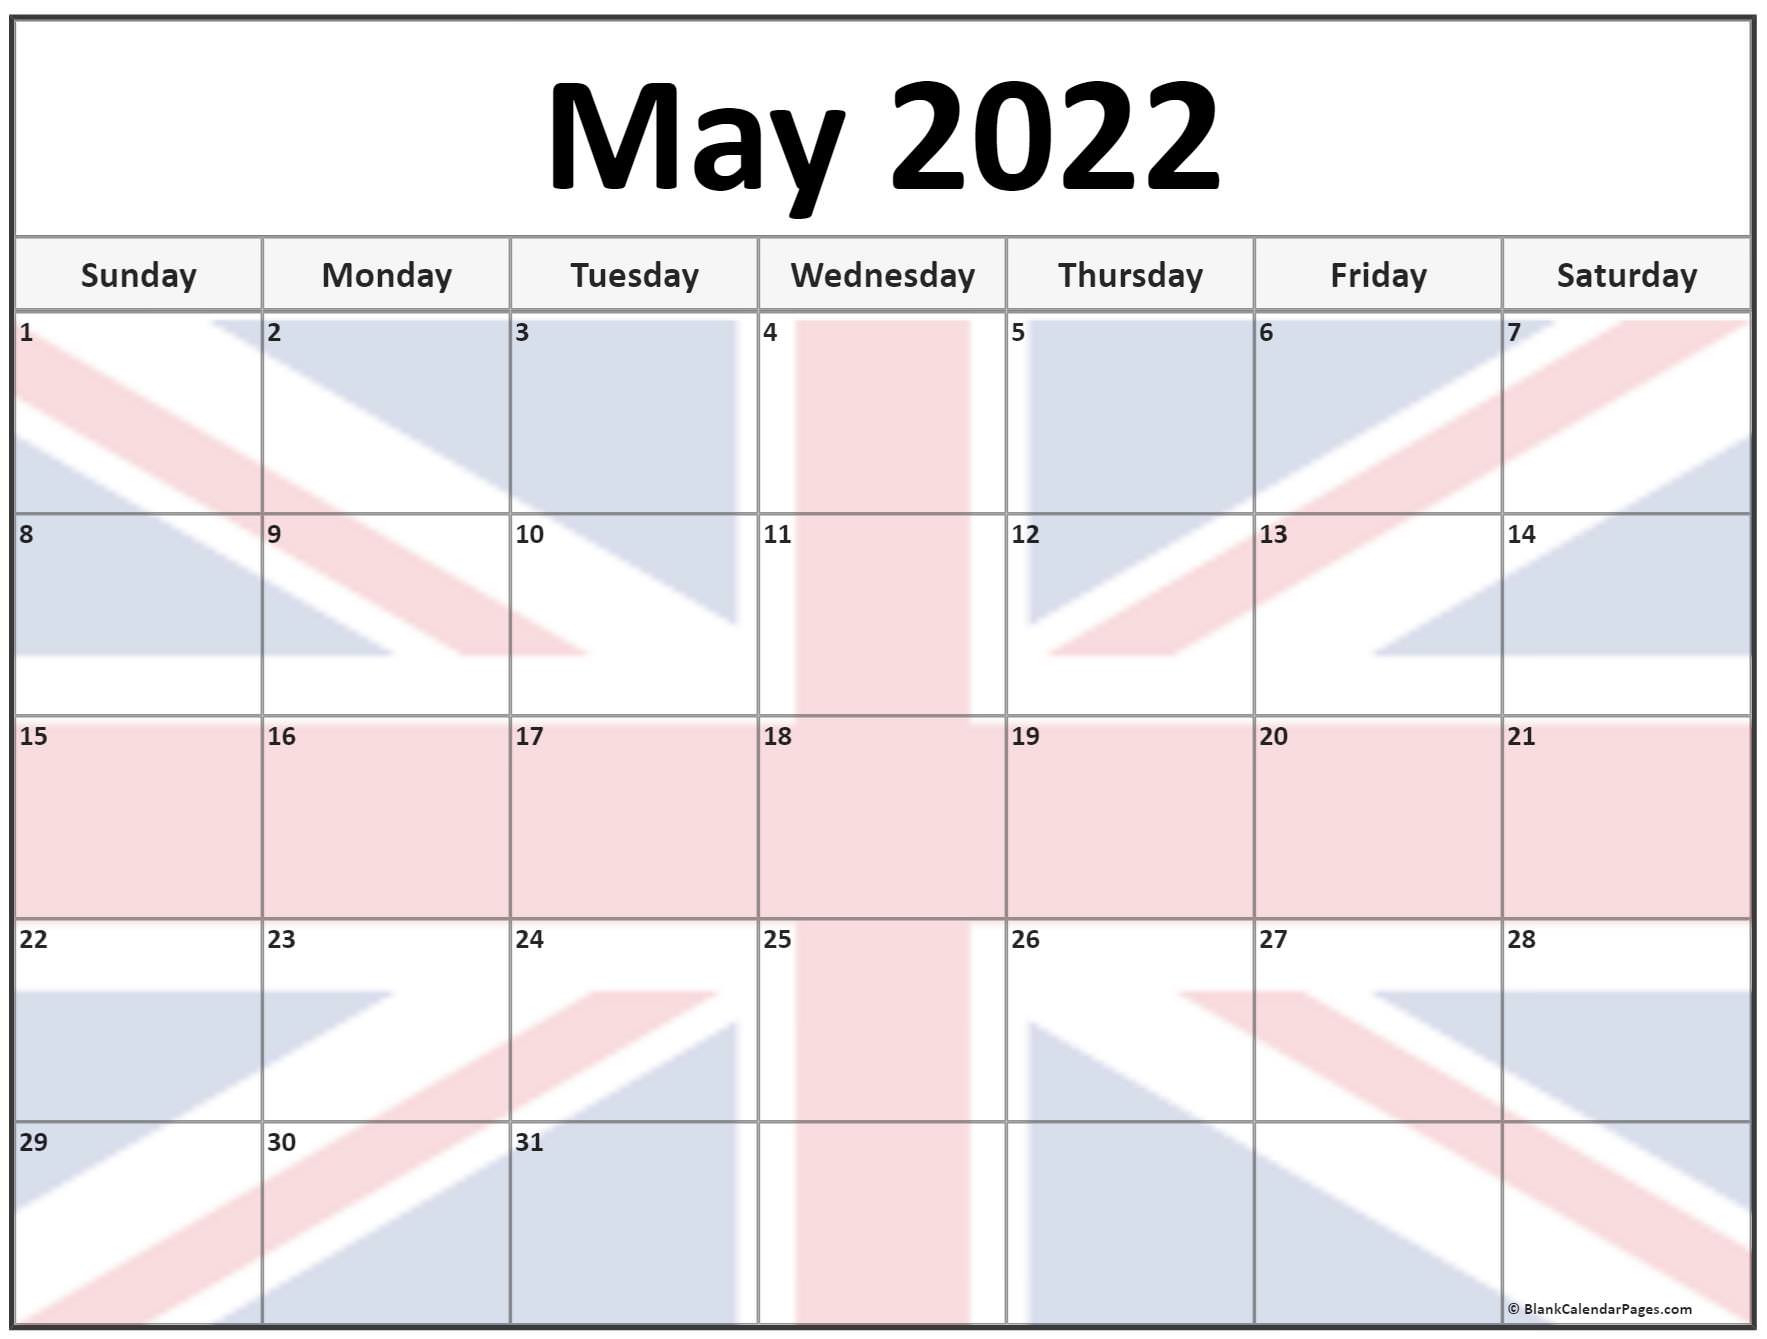 Collection Of May 2022 Photo Calendars With Image Filters.  Calendar For 2022 May